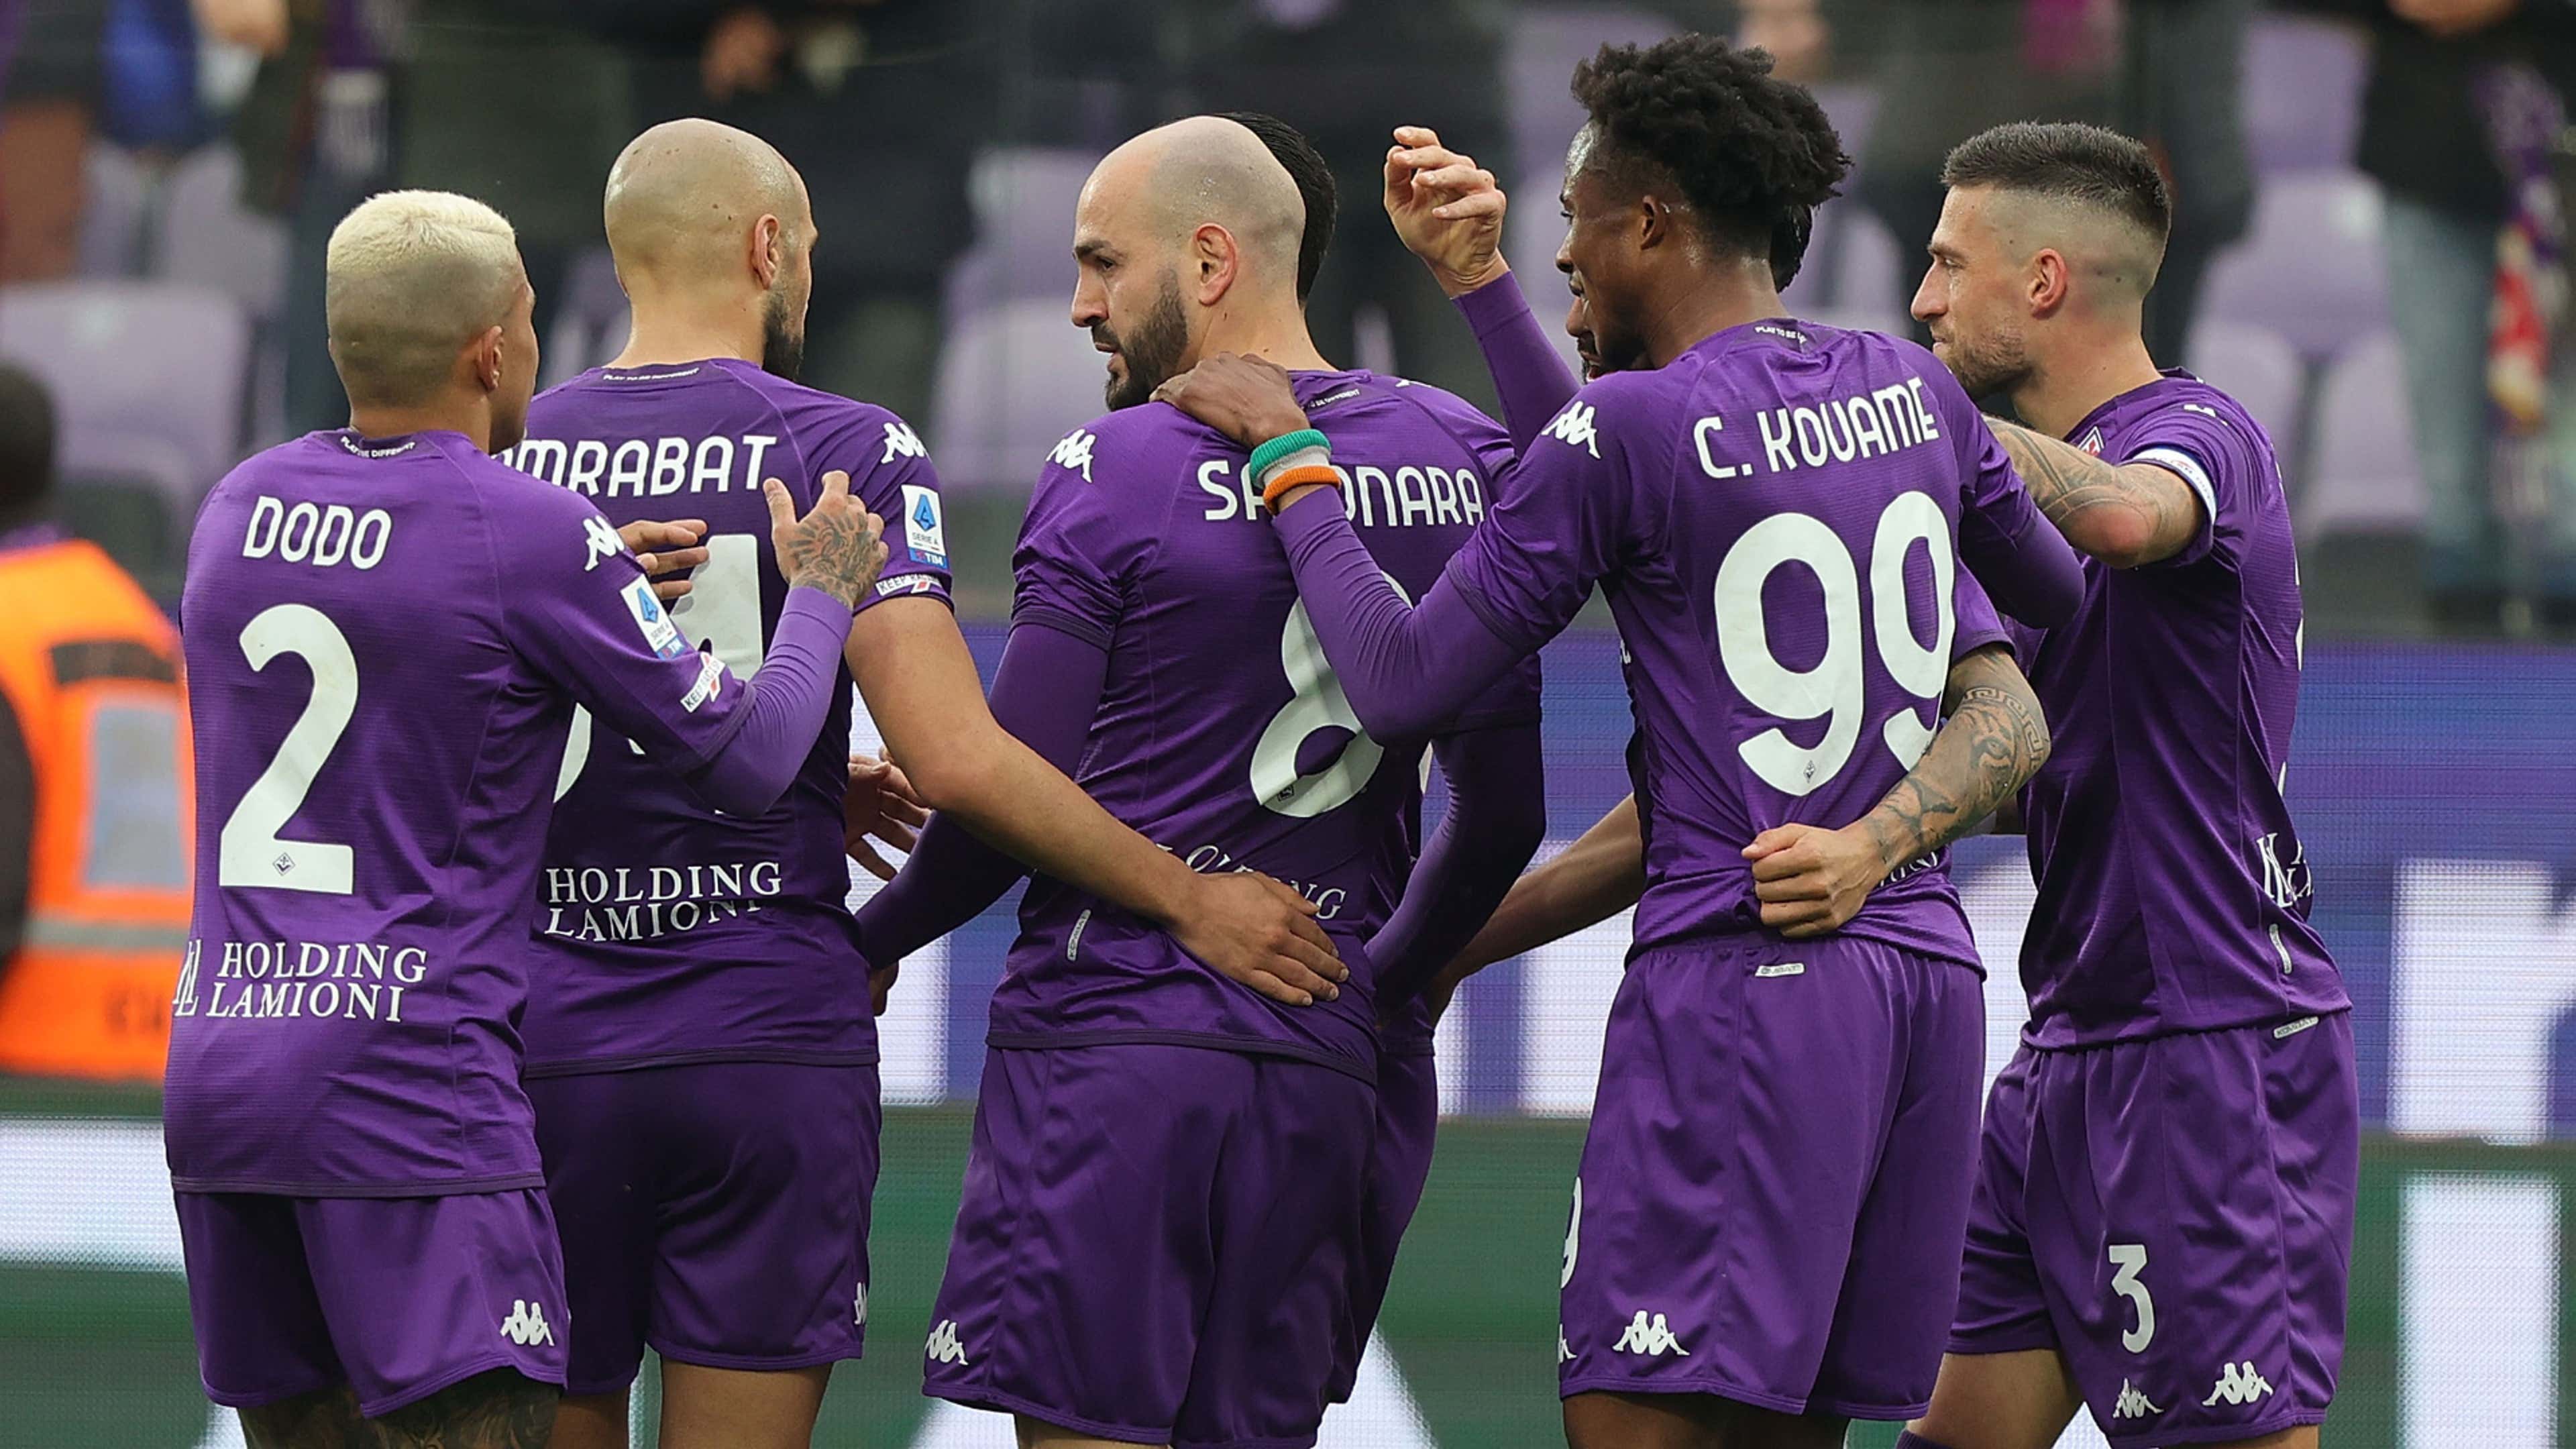 Fiorentina vs Inter Milan: Lineups and how to watch - Viola Nation